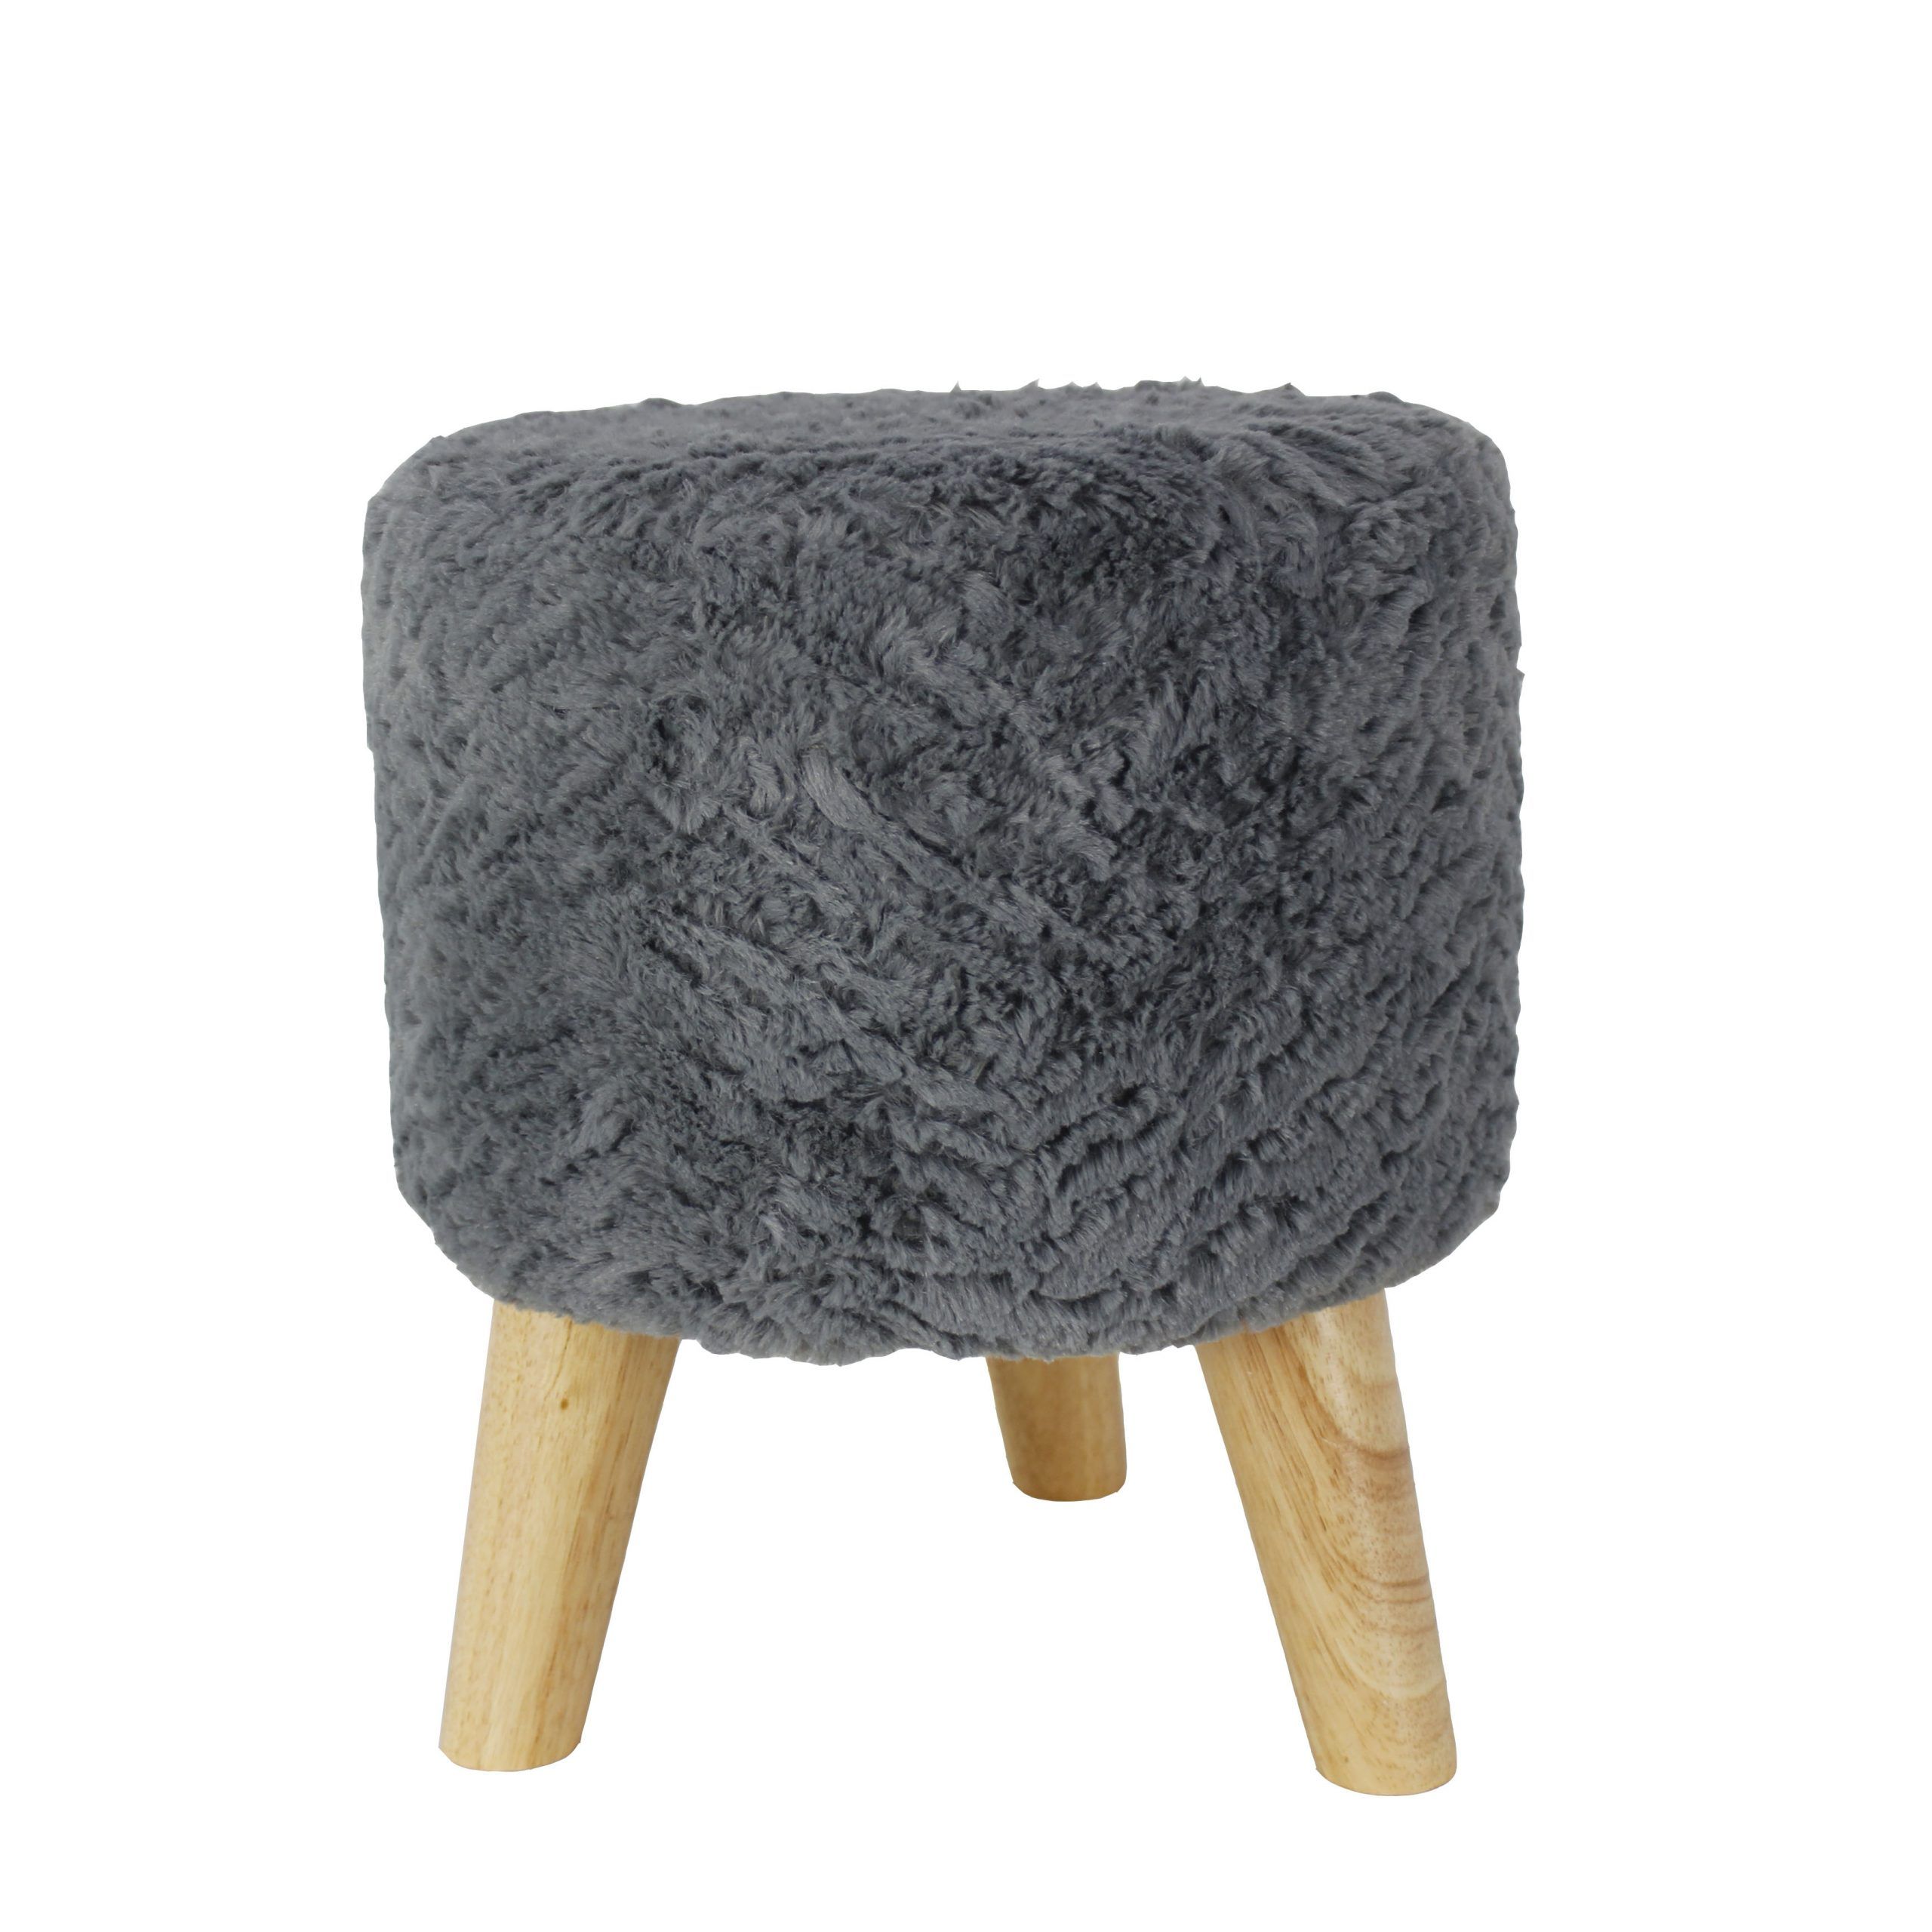 Stone Wool With Wooden Legs Ottomans In Most Recent Faux Fur Round Shape Foot Stool Ottoman Pouf Living Room Ottoman Stool (View 6 of 10)